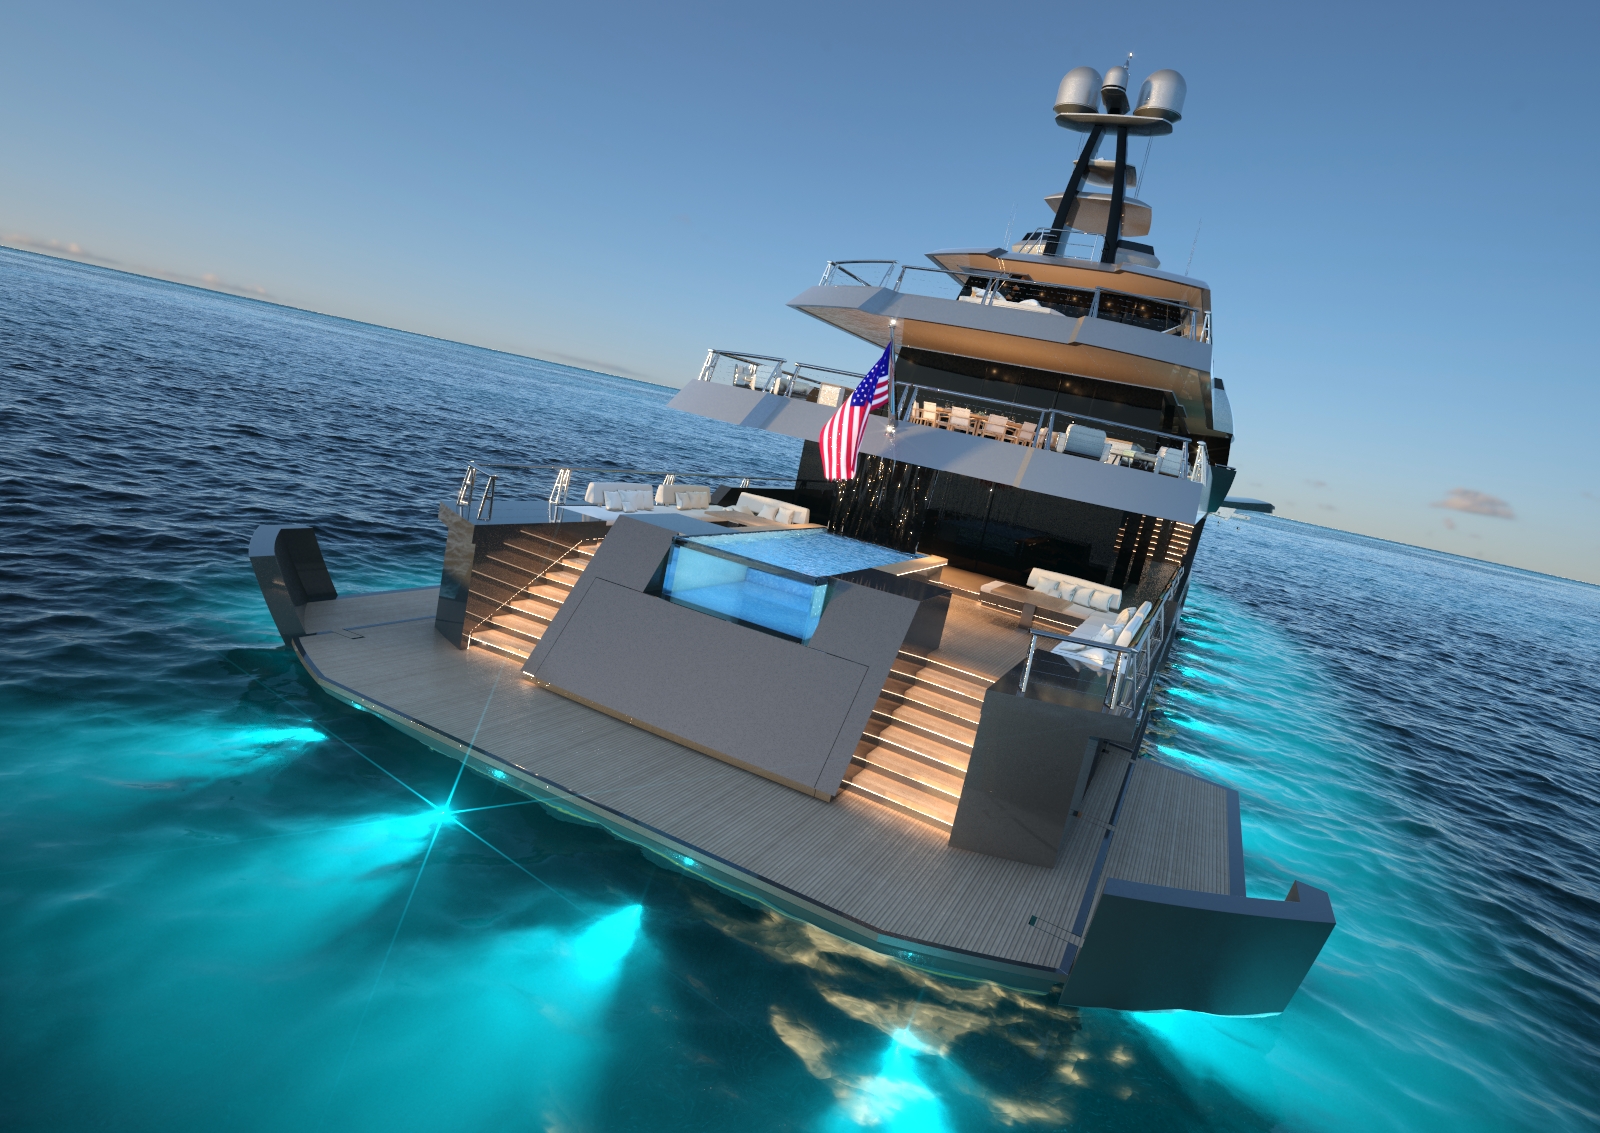 Project Metaverse Cloud Yachts